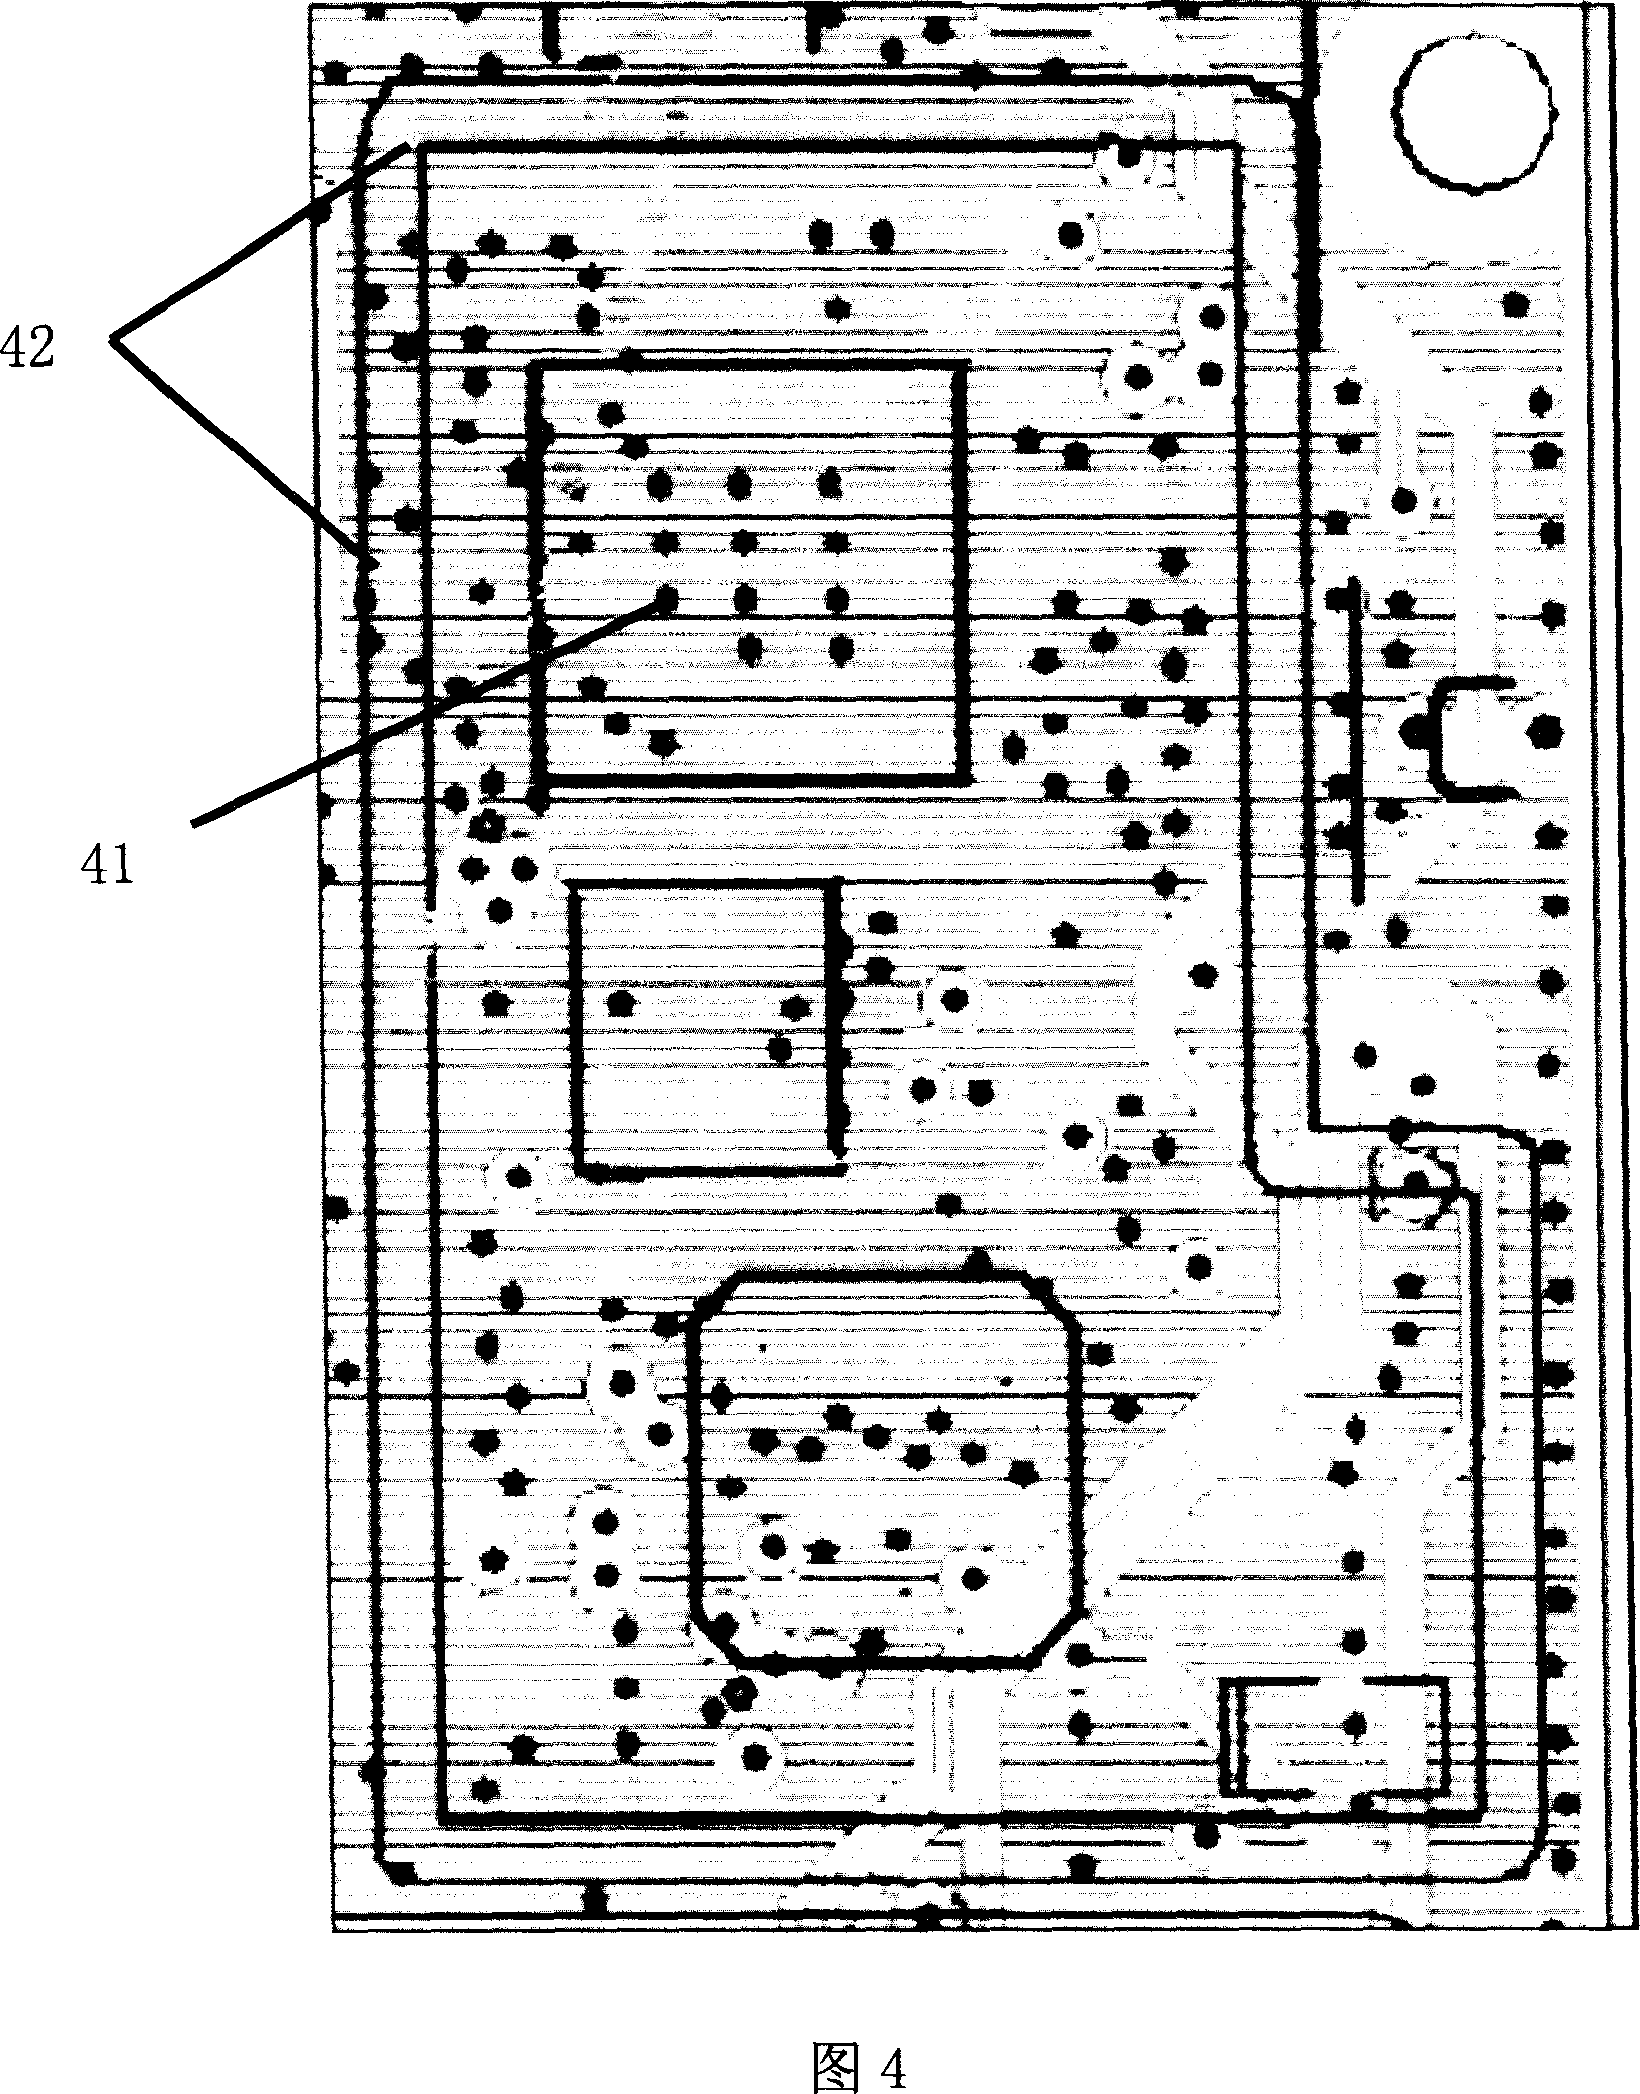 Allocation wiring structure of printing circuit board